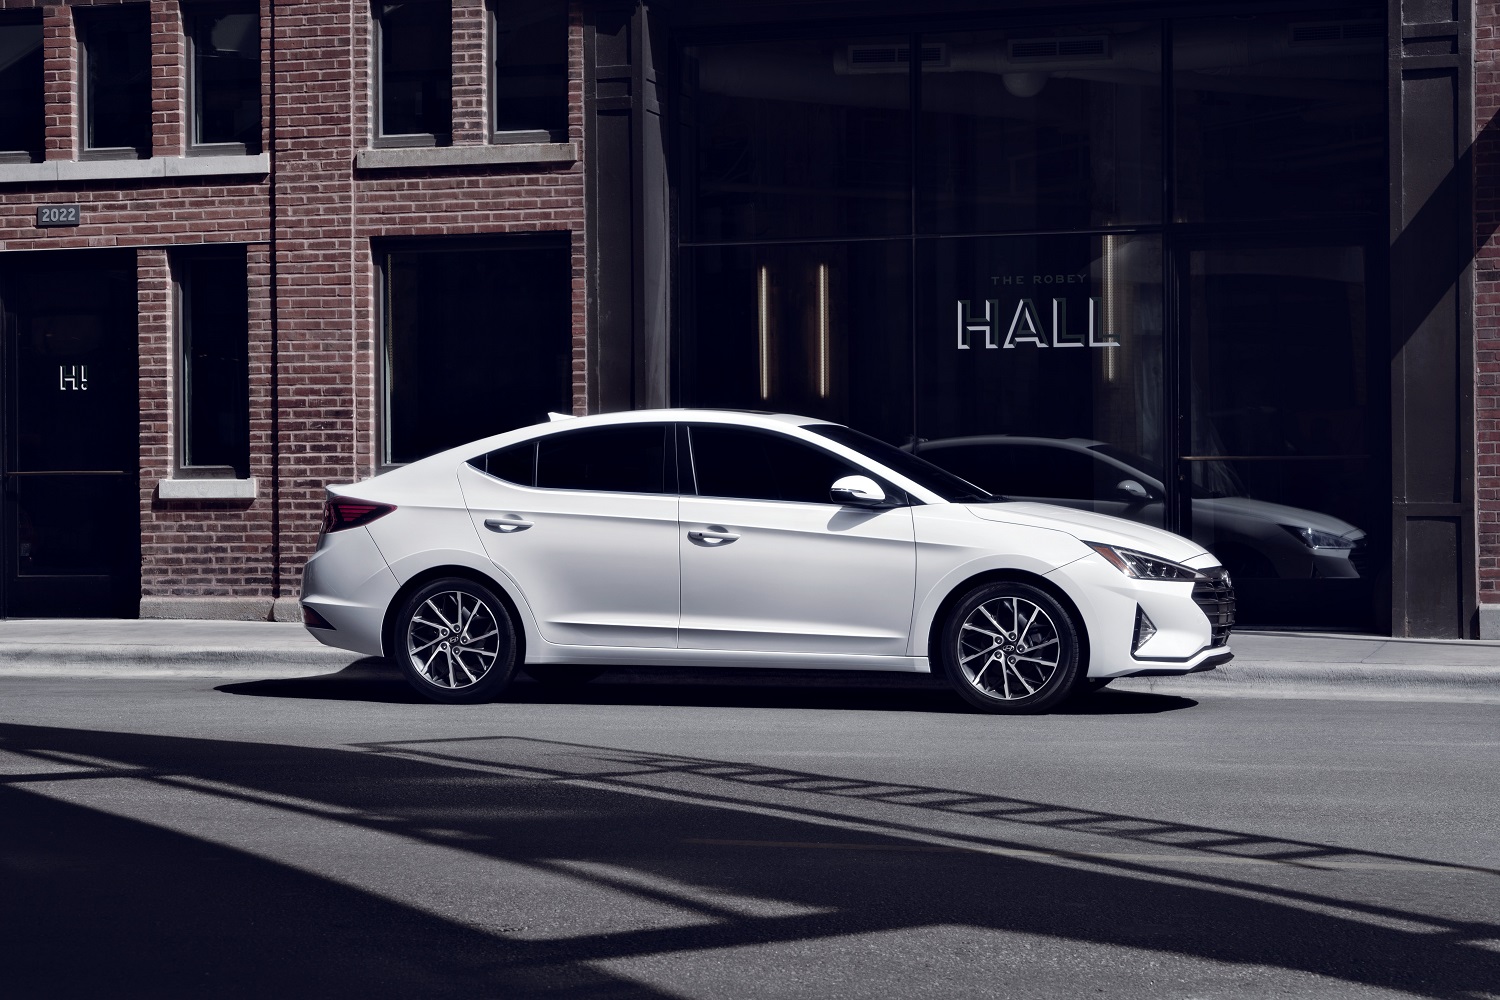 Lease a Hyundai in Eugene, OR